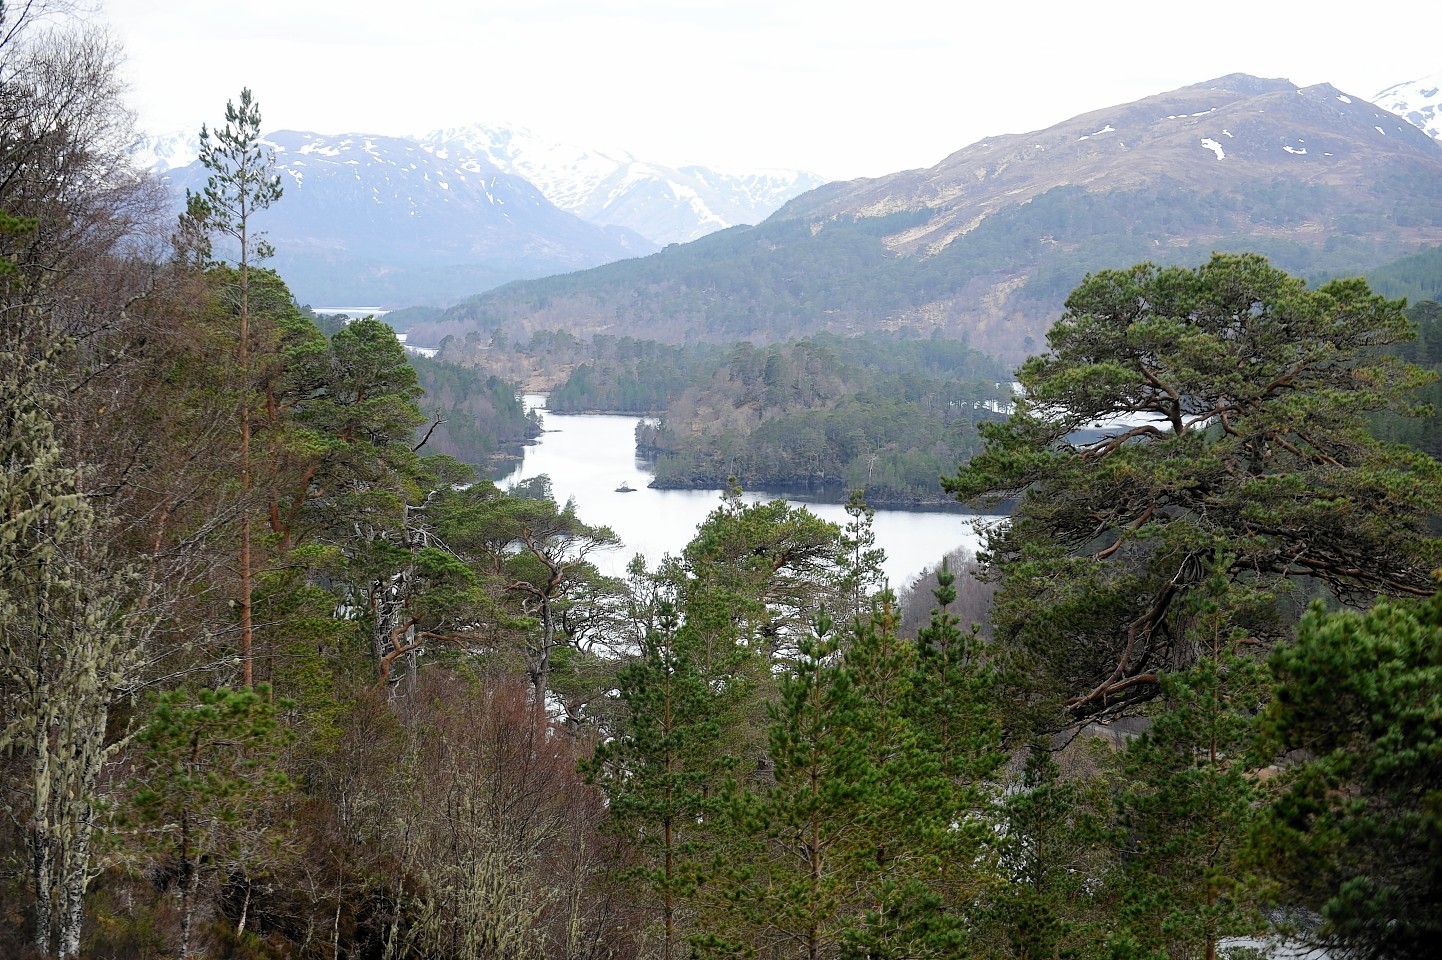 Glen Affric will host some of the orienteering competitions